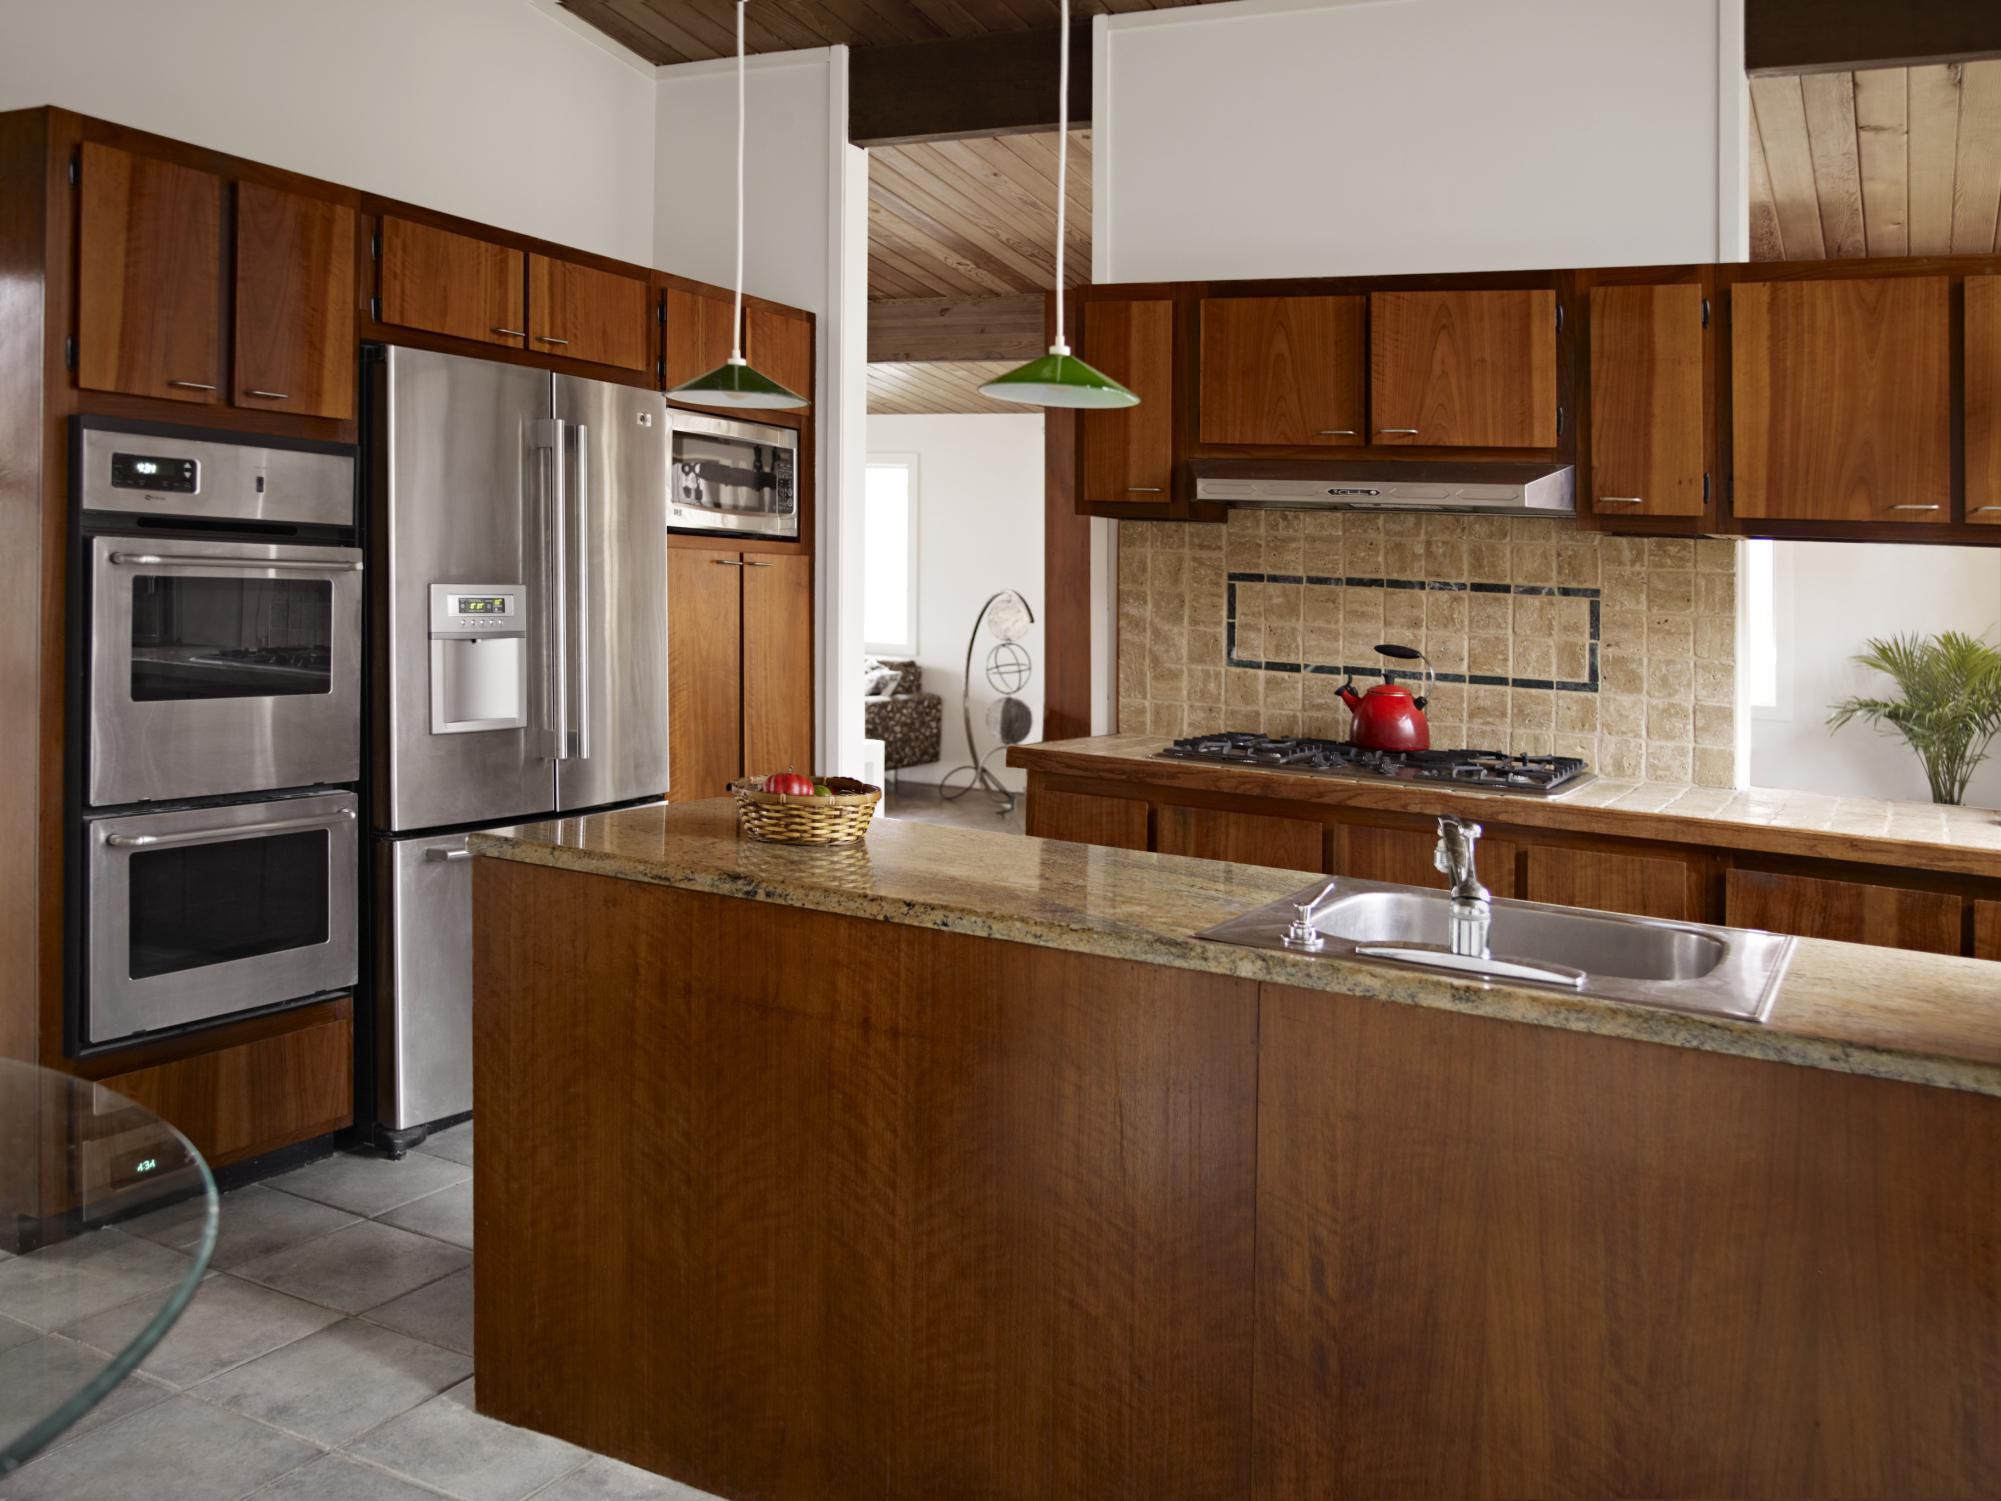 Cabinet Refacing Guide To Cost Process Pros Cons